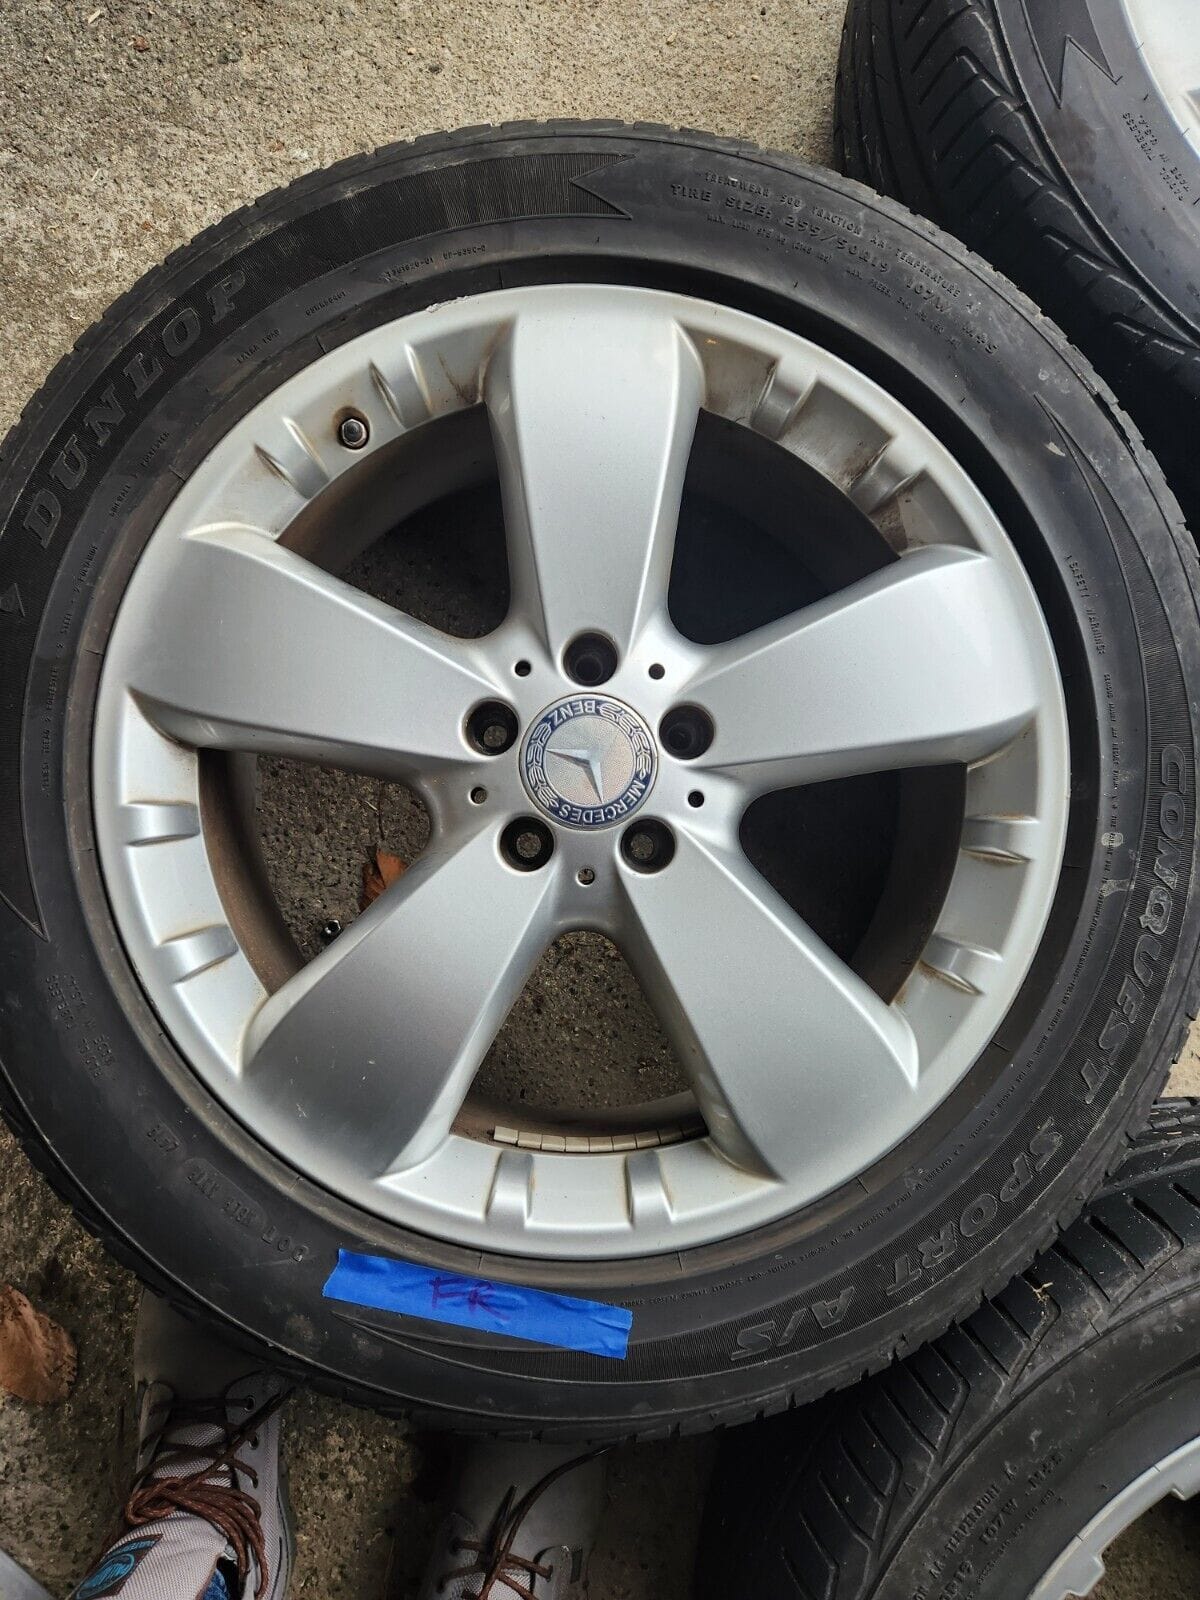 Wheels and Tires/Axles - Mercedes Benz Wheels and tires 19" ML350 W164 OEM Good condition! - Used - 2003 to 2015 Mercedes-Benz ML350 - Sudbury, MA 01776, United States